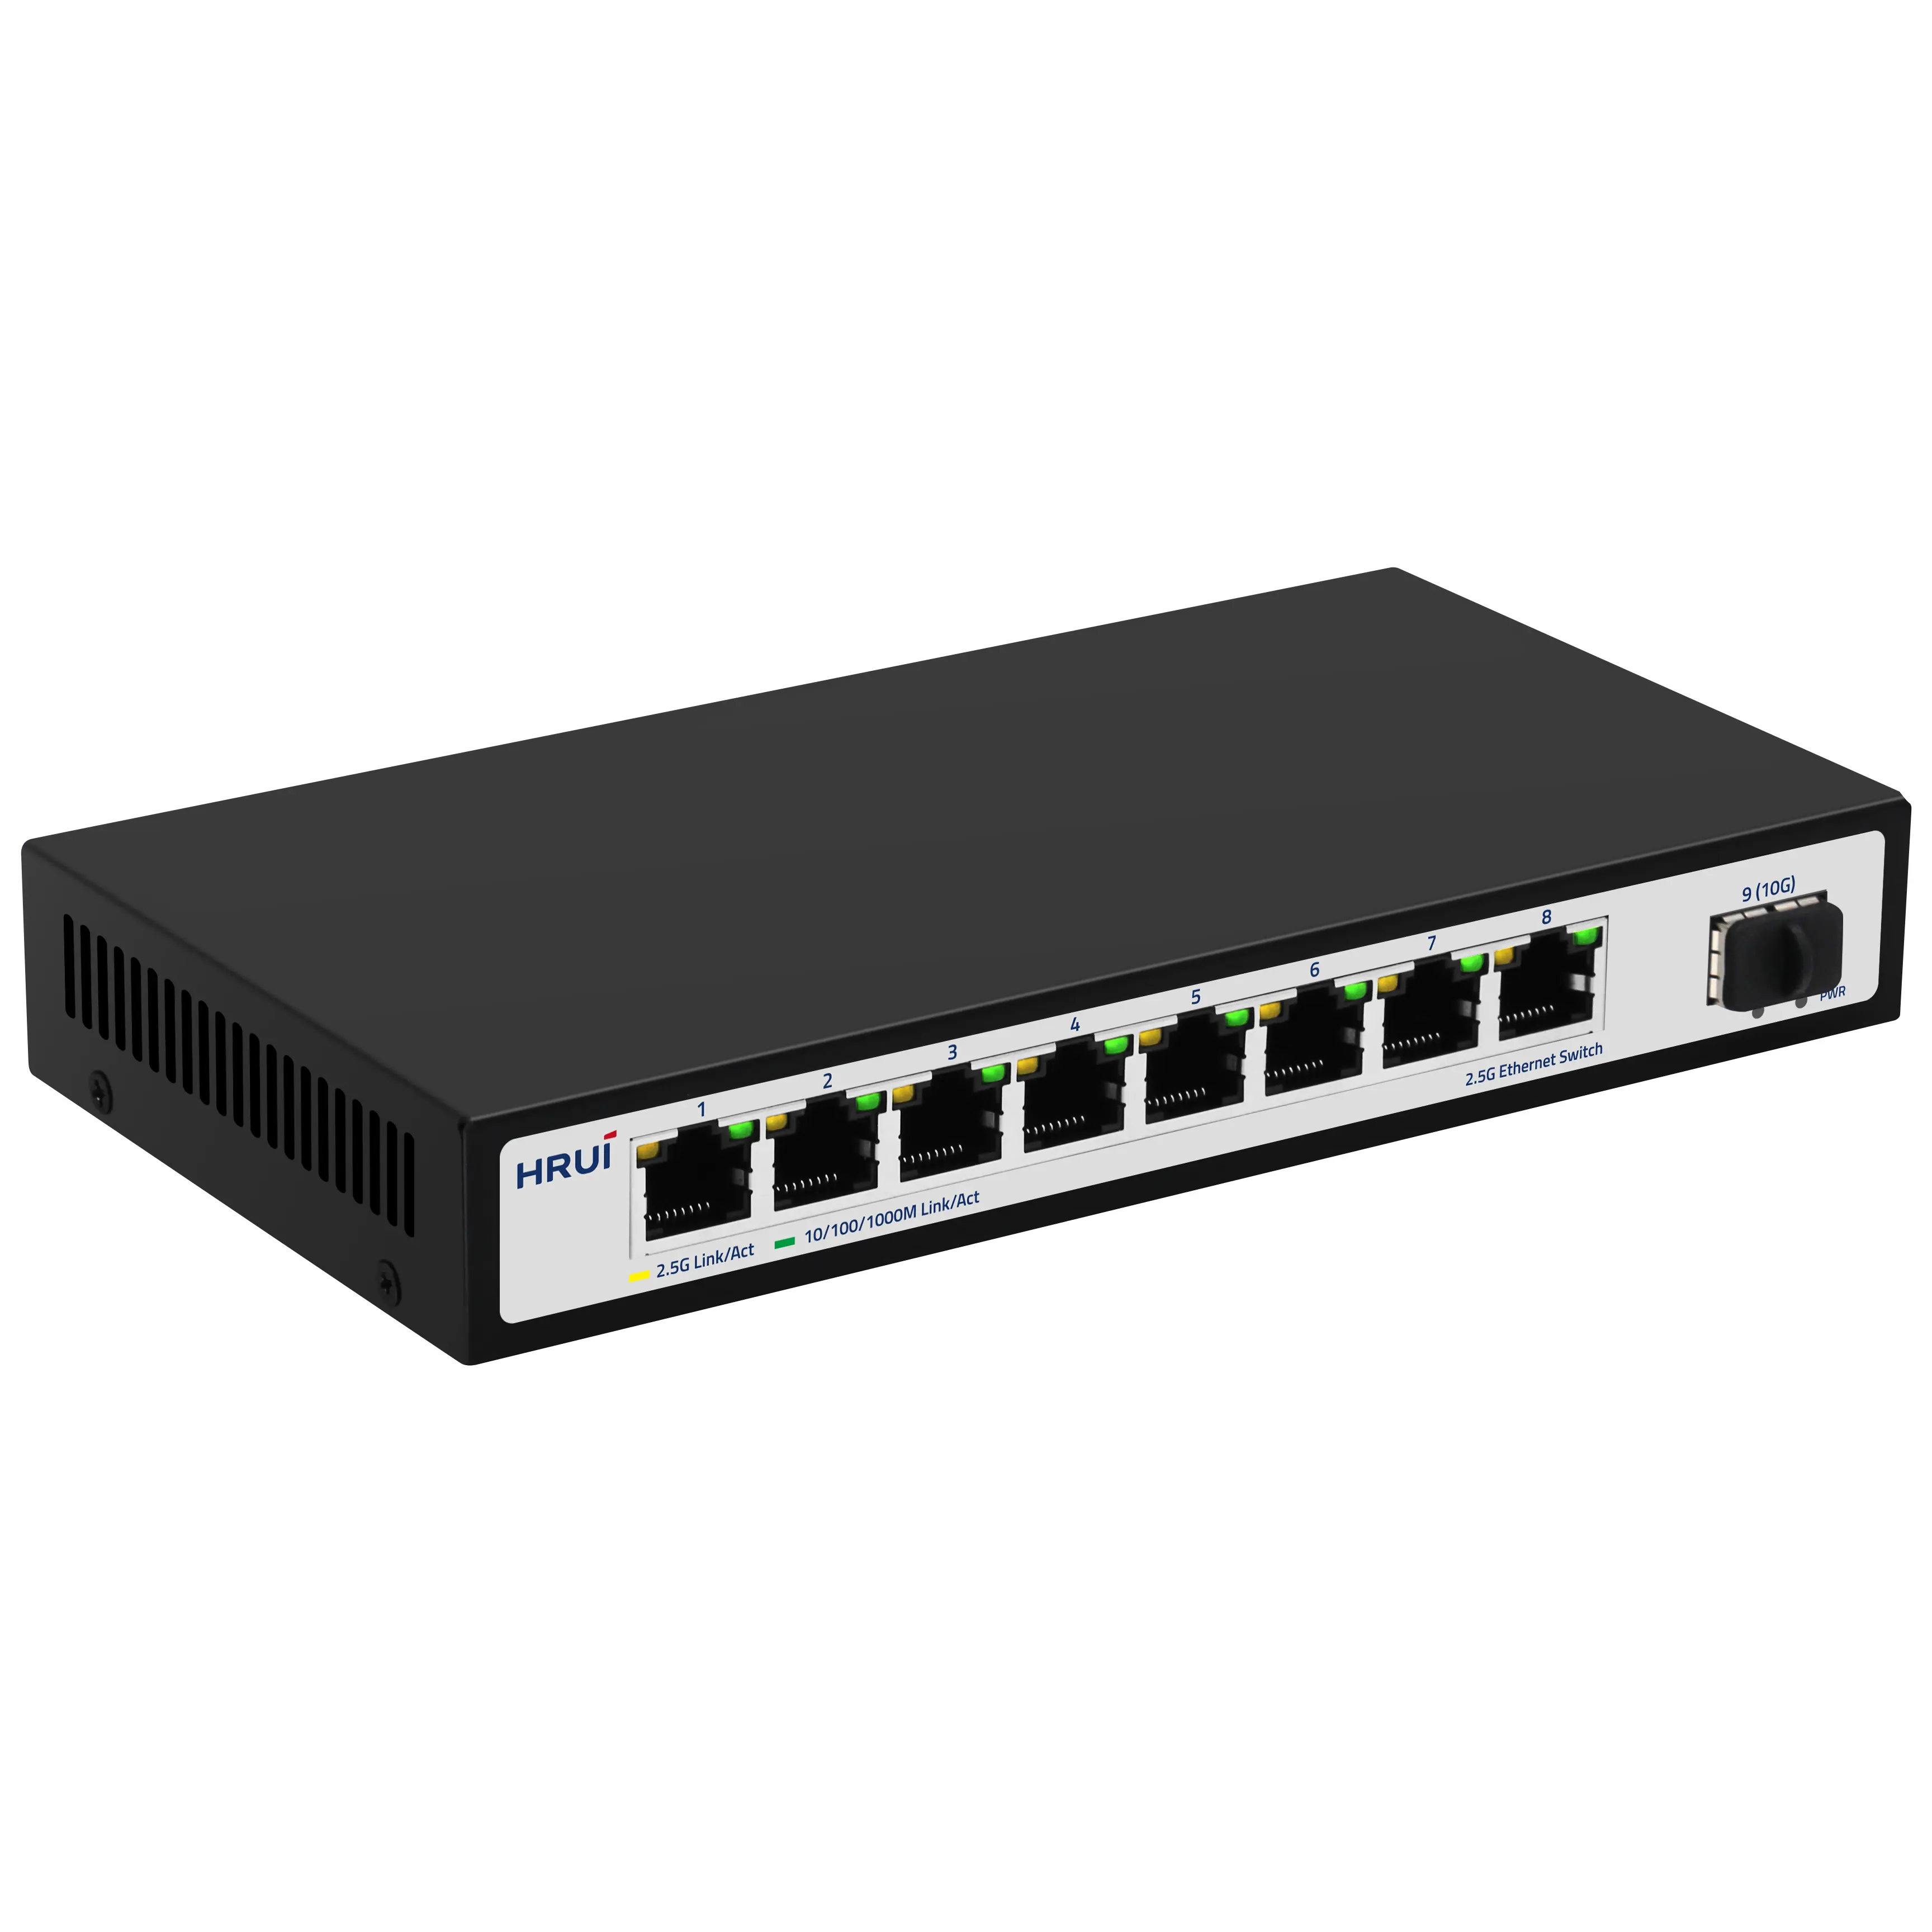 New model Ethernet Switch 9 ports 2.5G network switch best price with OEM ODM